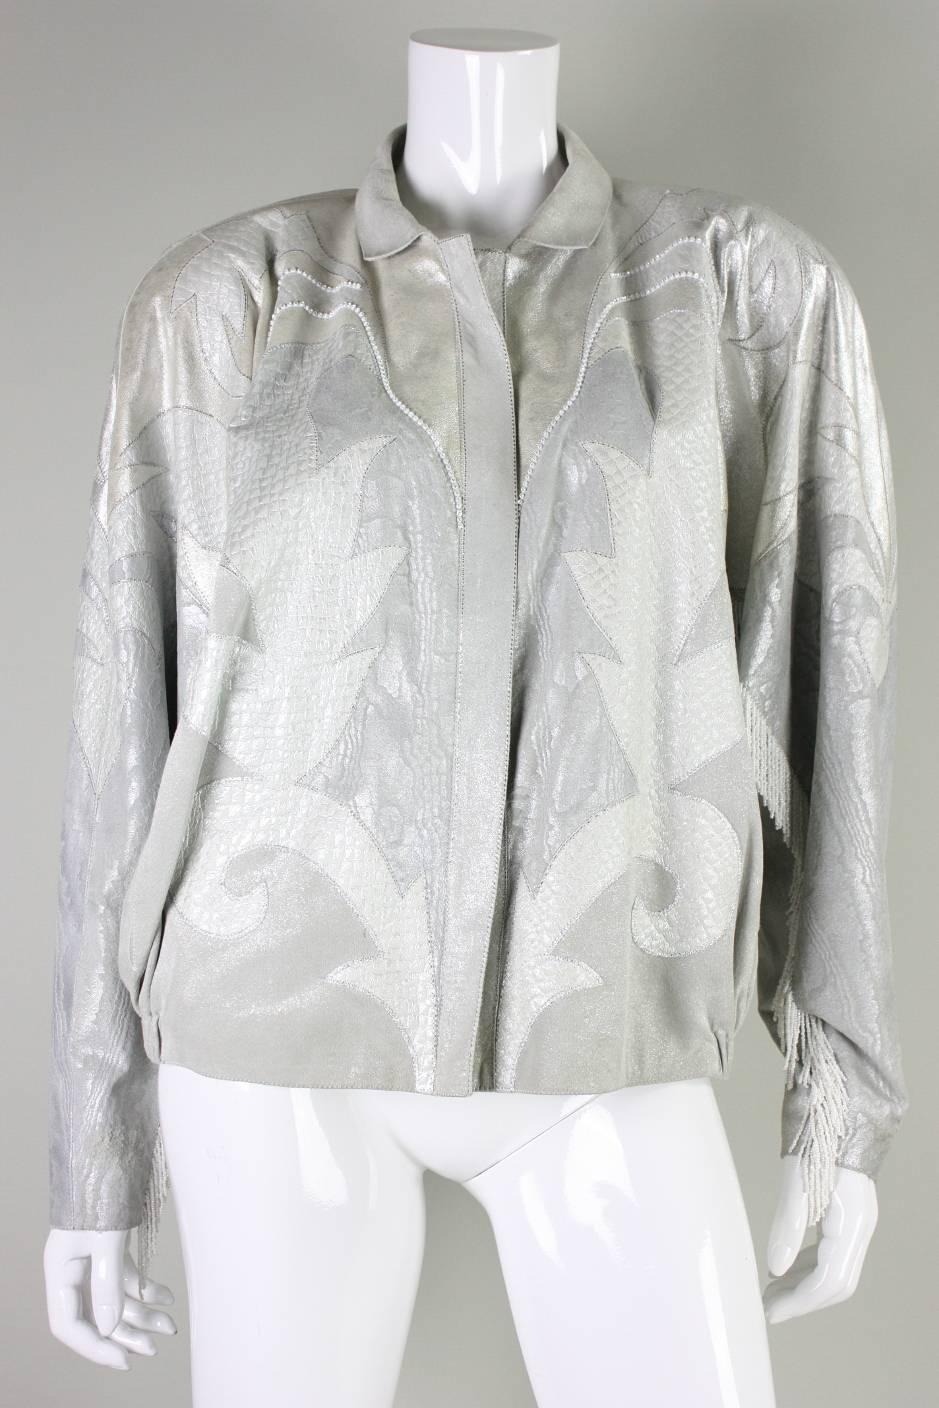 Vintage jacket from Roberto Cavalli is made of metallic silver suede with fabrics and other skins appliqued on.  Jacket features white beaded fringe down the backs of the sleeves.  It has a turn-down collar, rhinestone detailing, and side seam